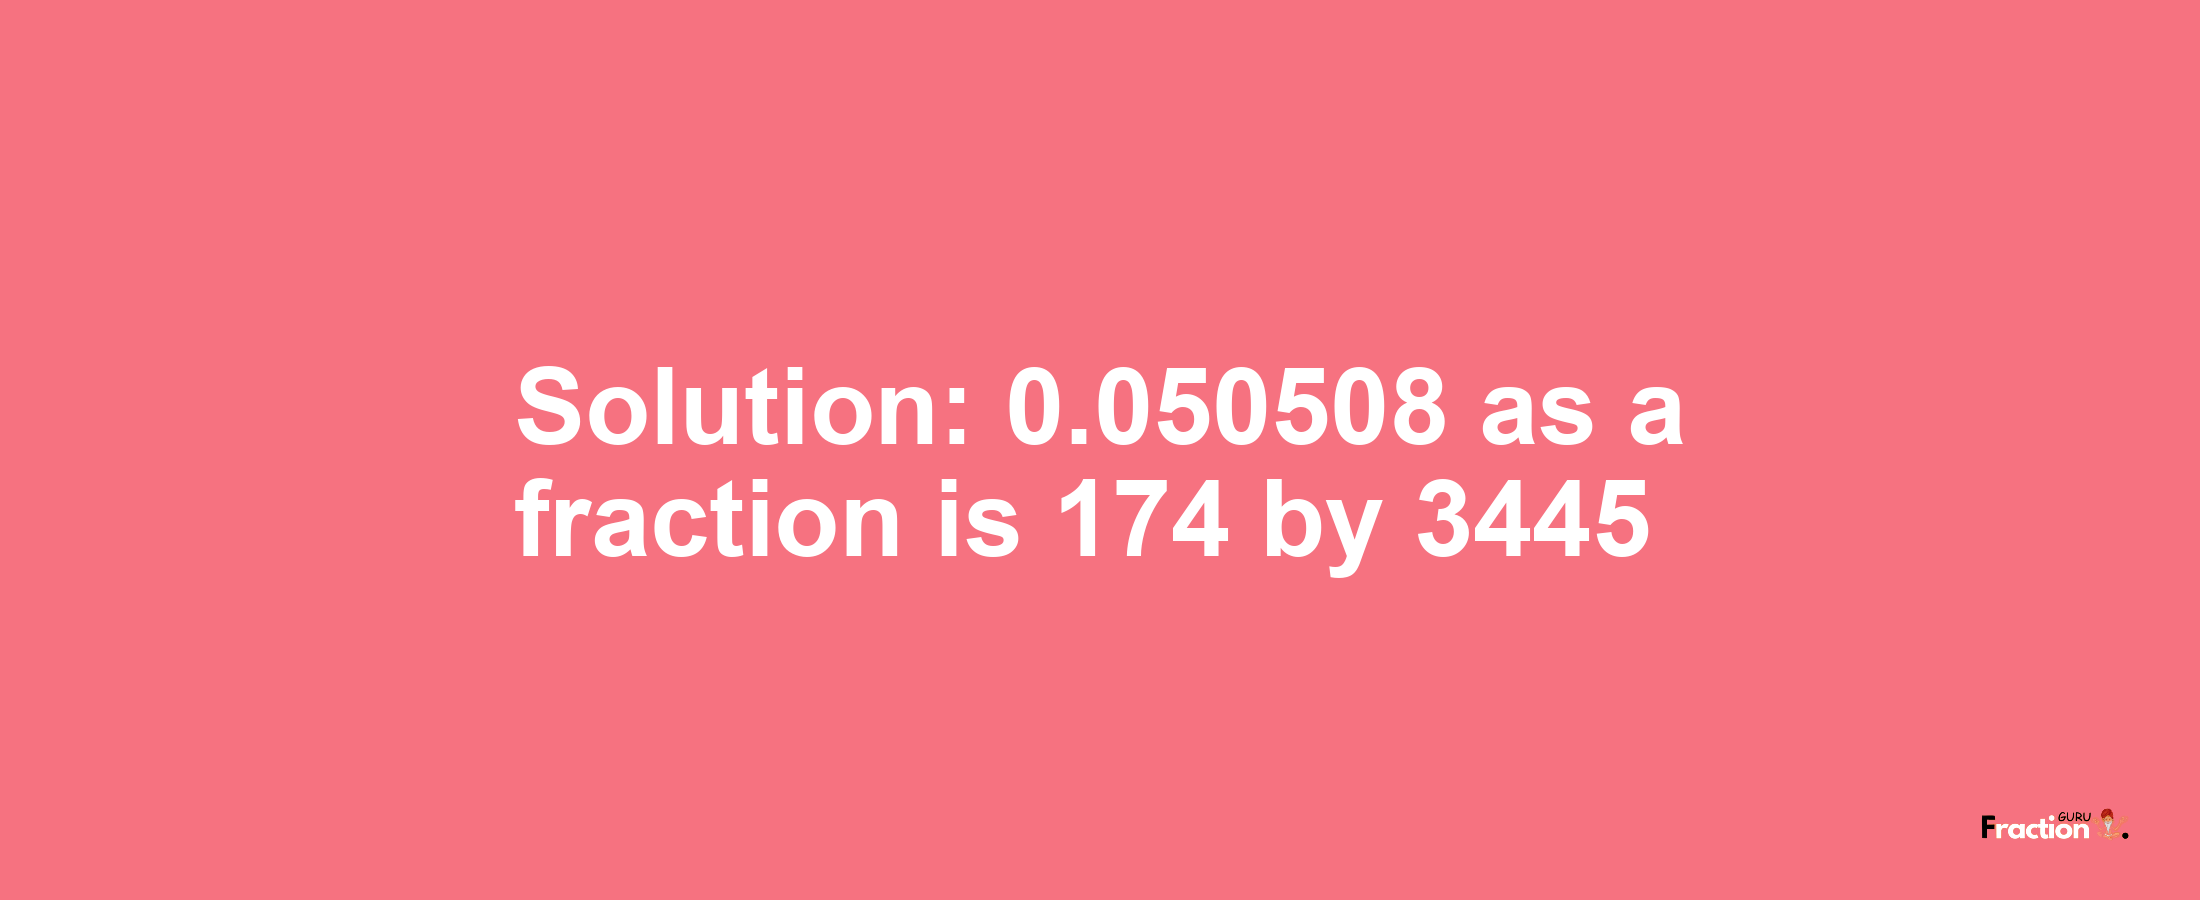 Solution:0.050508 as a fraction is 174/3445